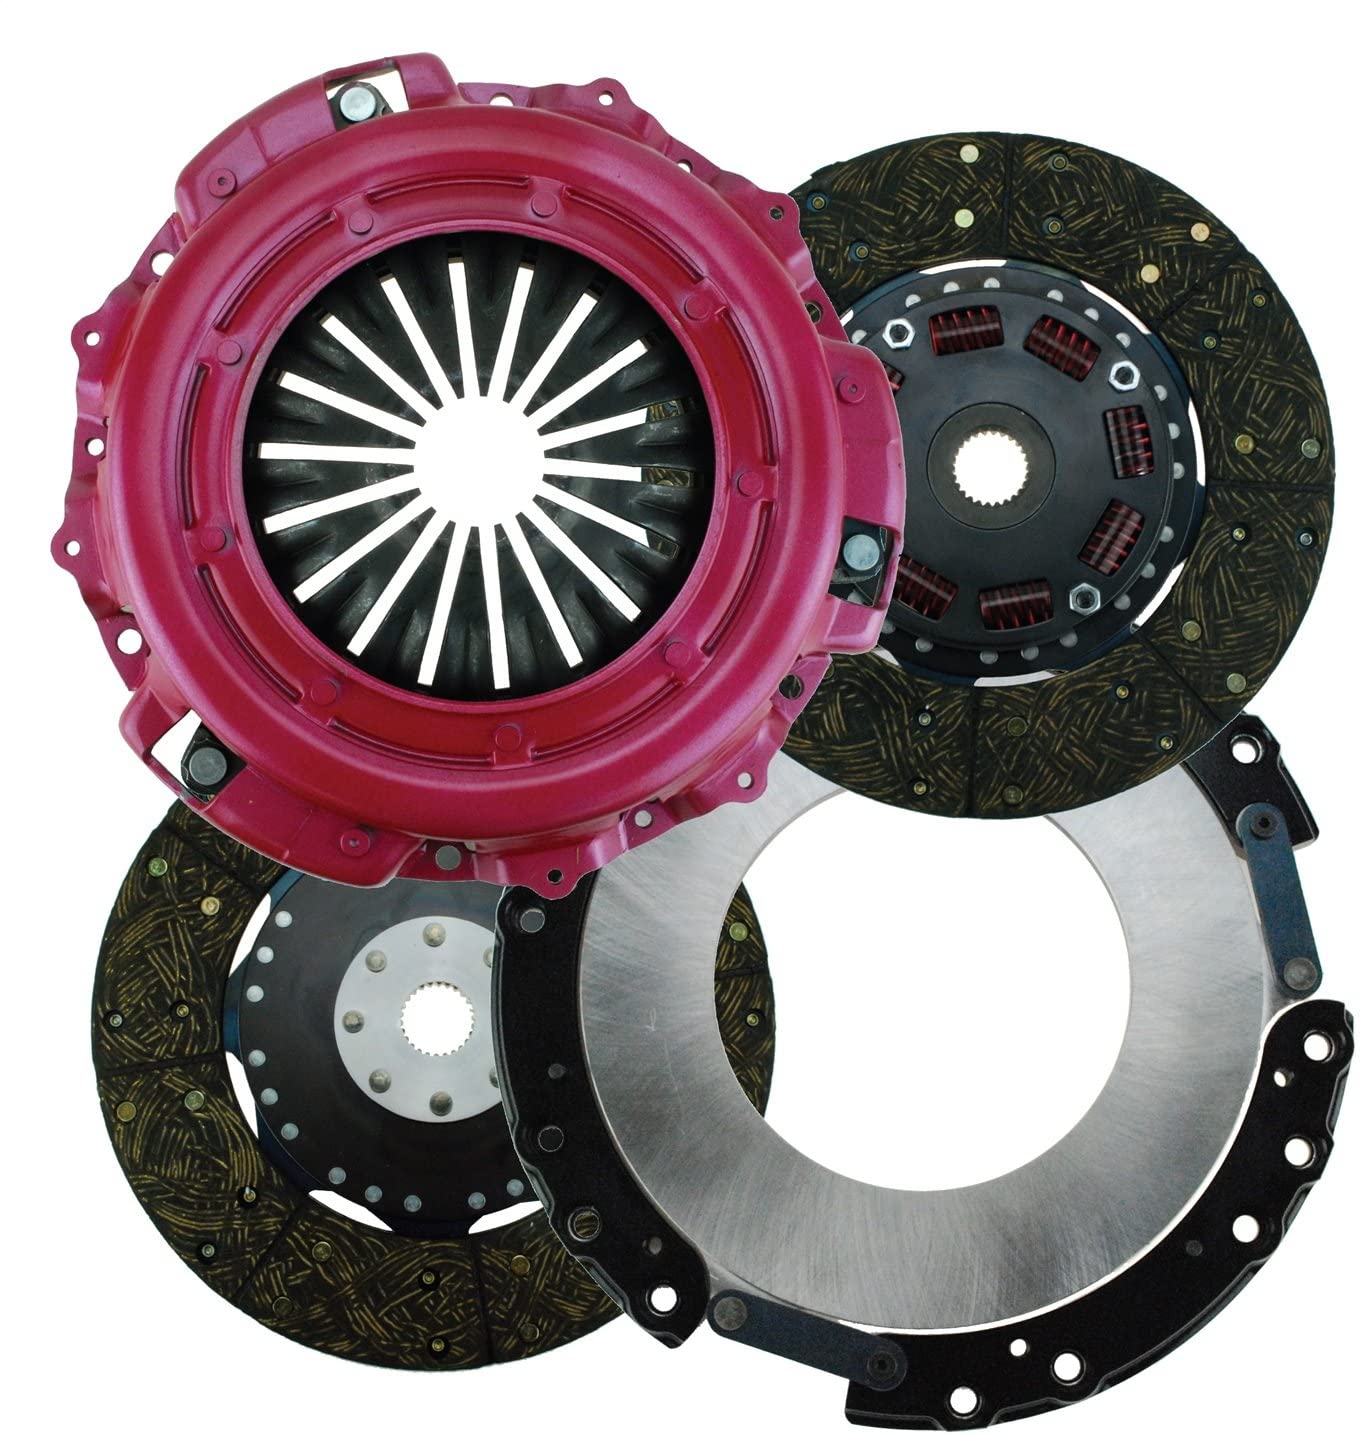 Ram 50-2259 Concept 10.5 Organic Dual Disc Clutch Assembly Size: 10.5 in. 26 Spline By 1-1/8 in. 157 Teeth Count Concept 10.5 Organic Dual Disc Clutch Assembly